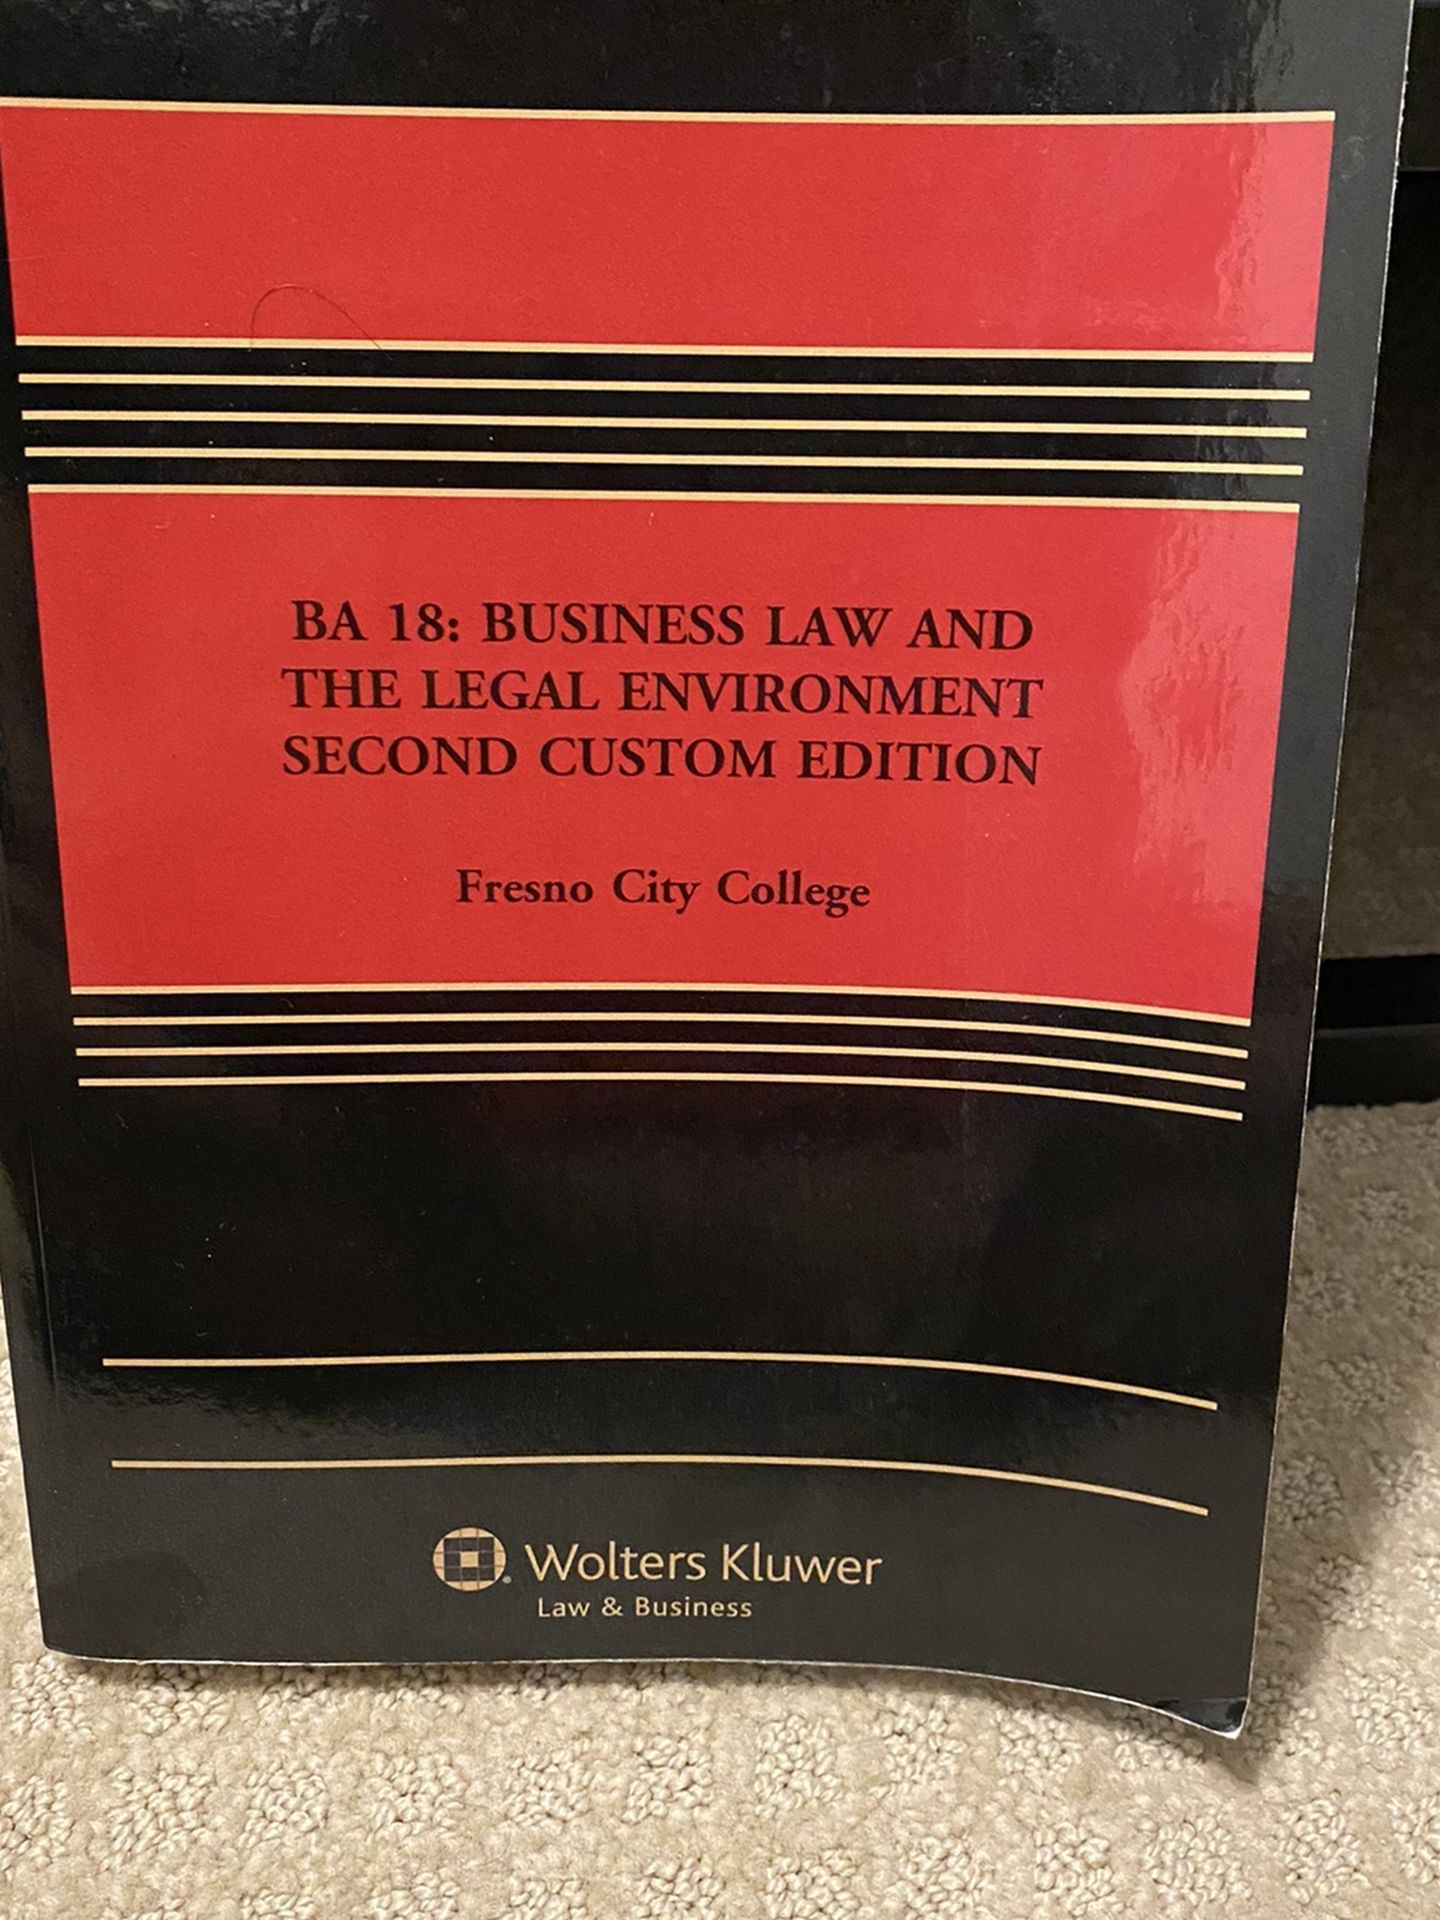 BA 18: Business Law And The Legal Environment Second Custom Edition